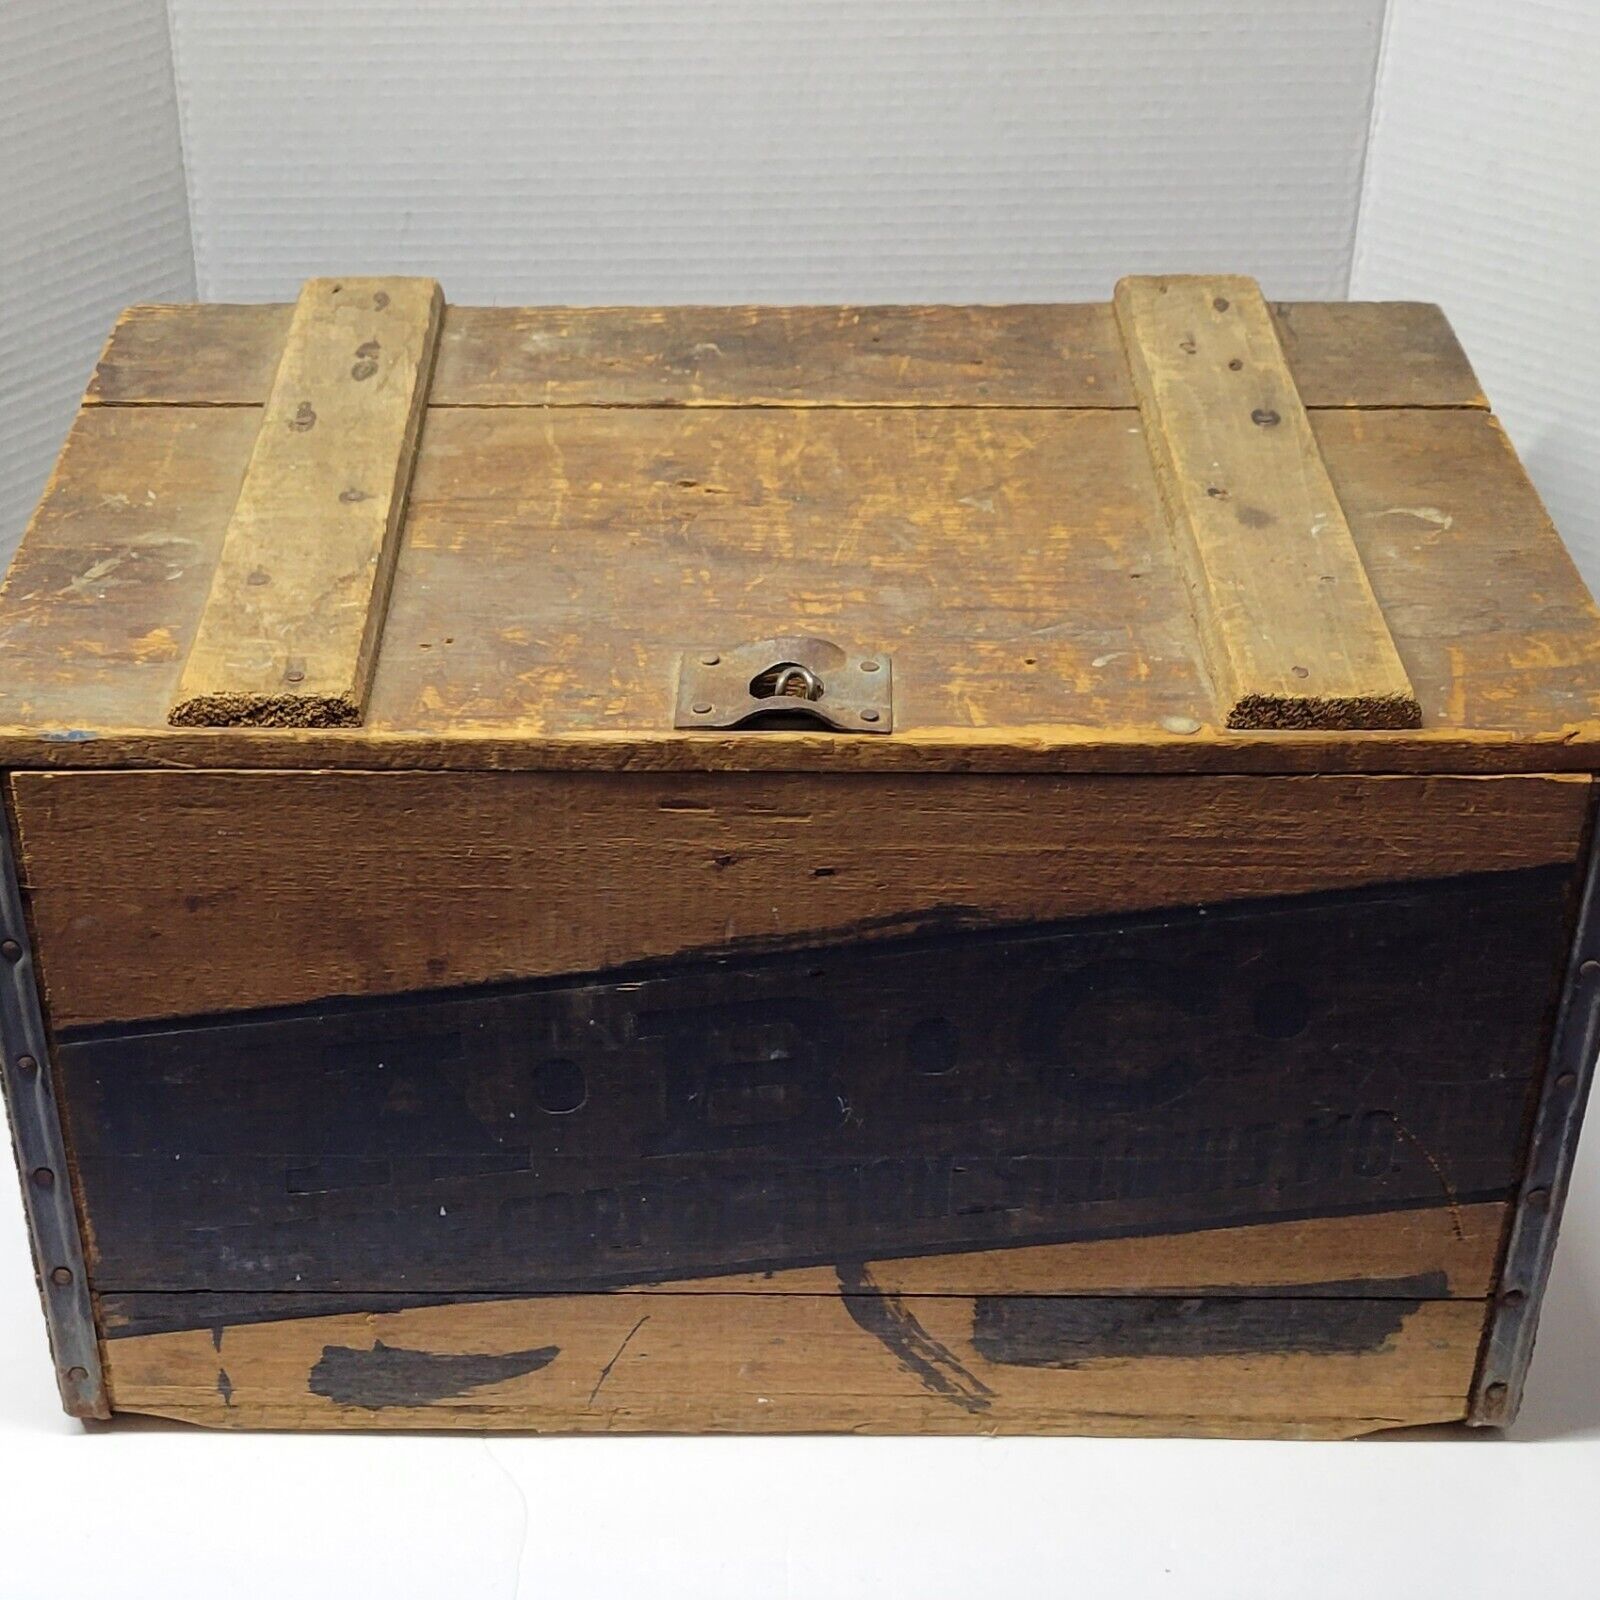 Vintage 1934 ABC Wooden Crate Box w/ Lid St Louis American Brewing Co